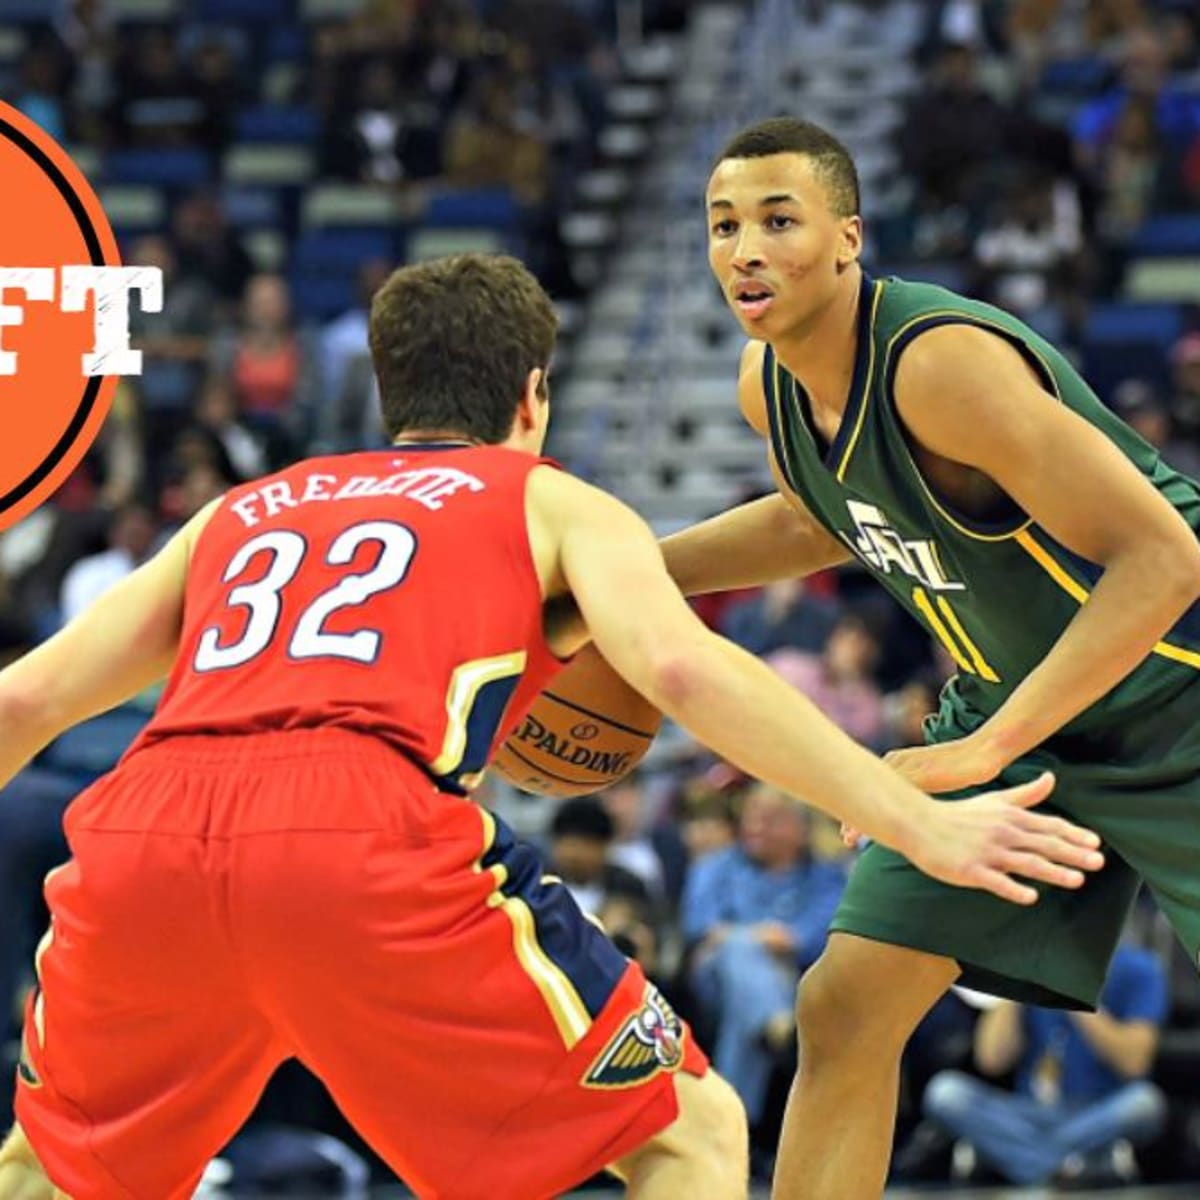 Waiting for Exum: Is this the year Dante Exum finally arrives